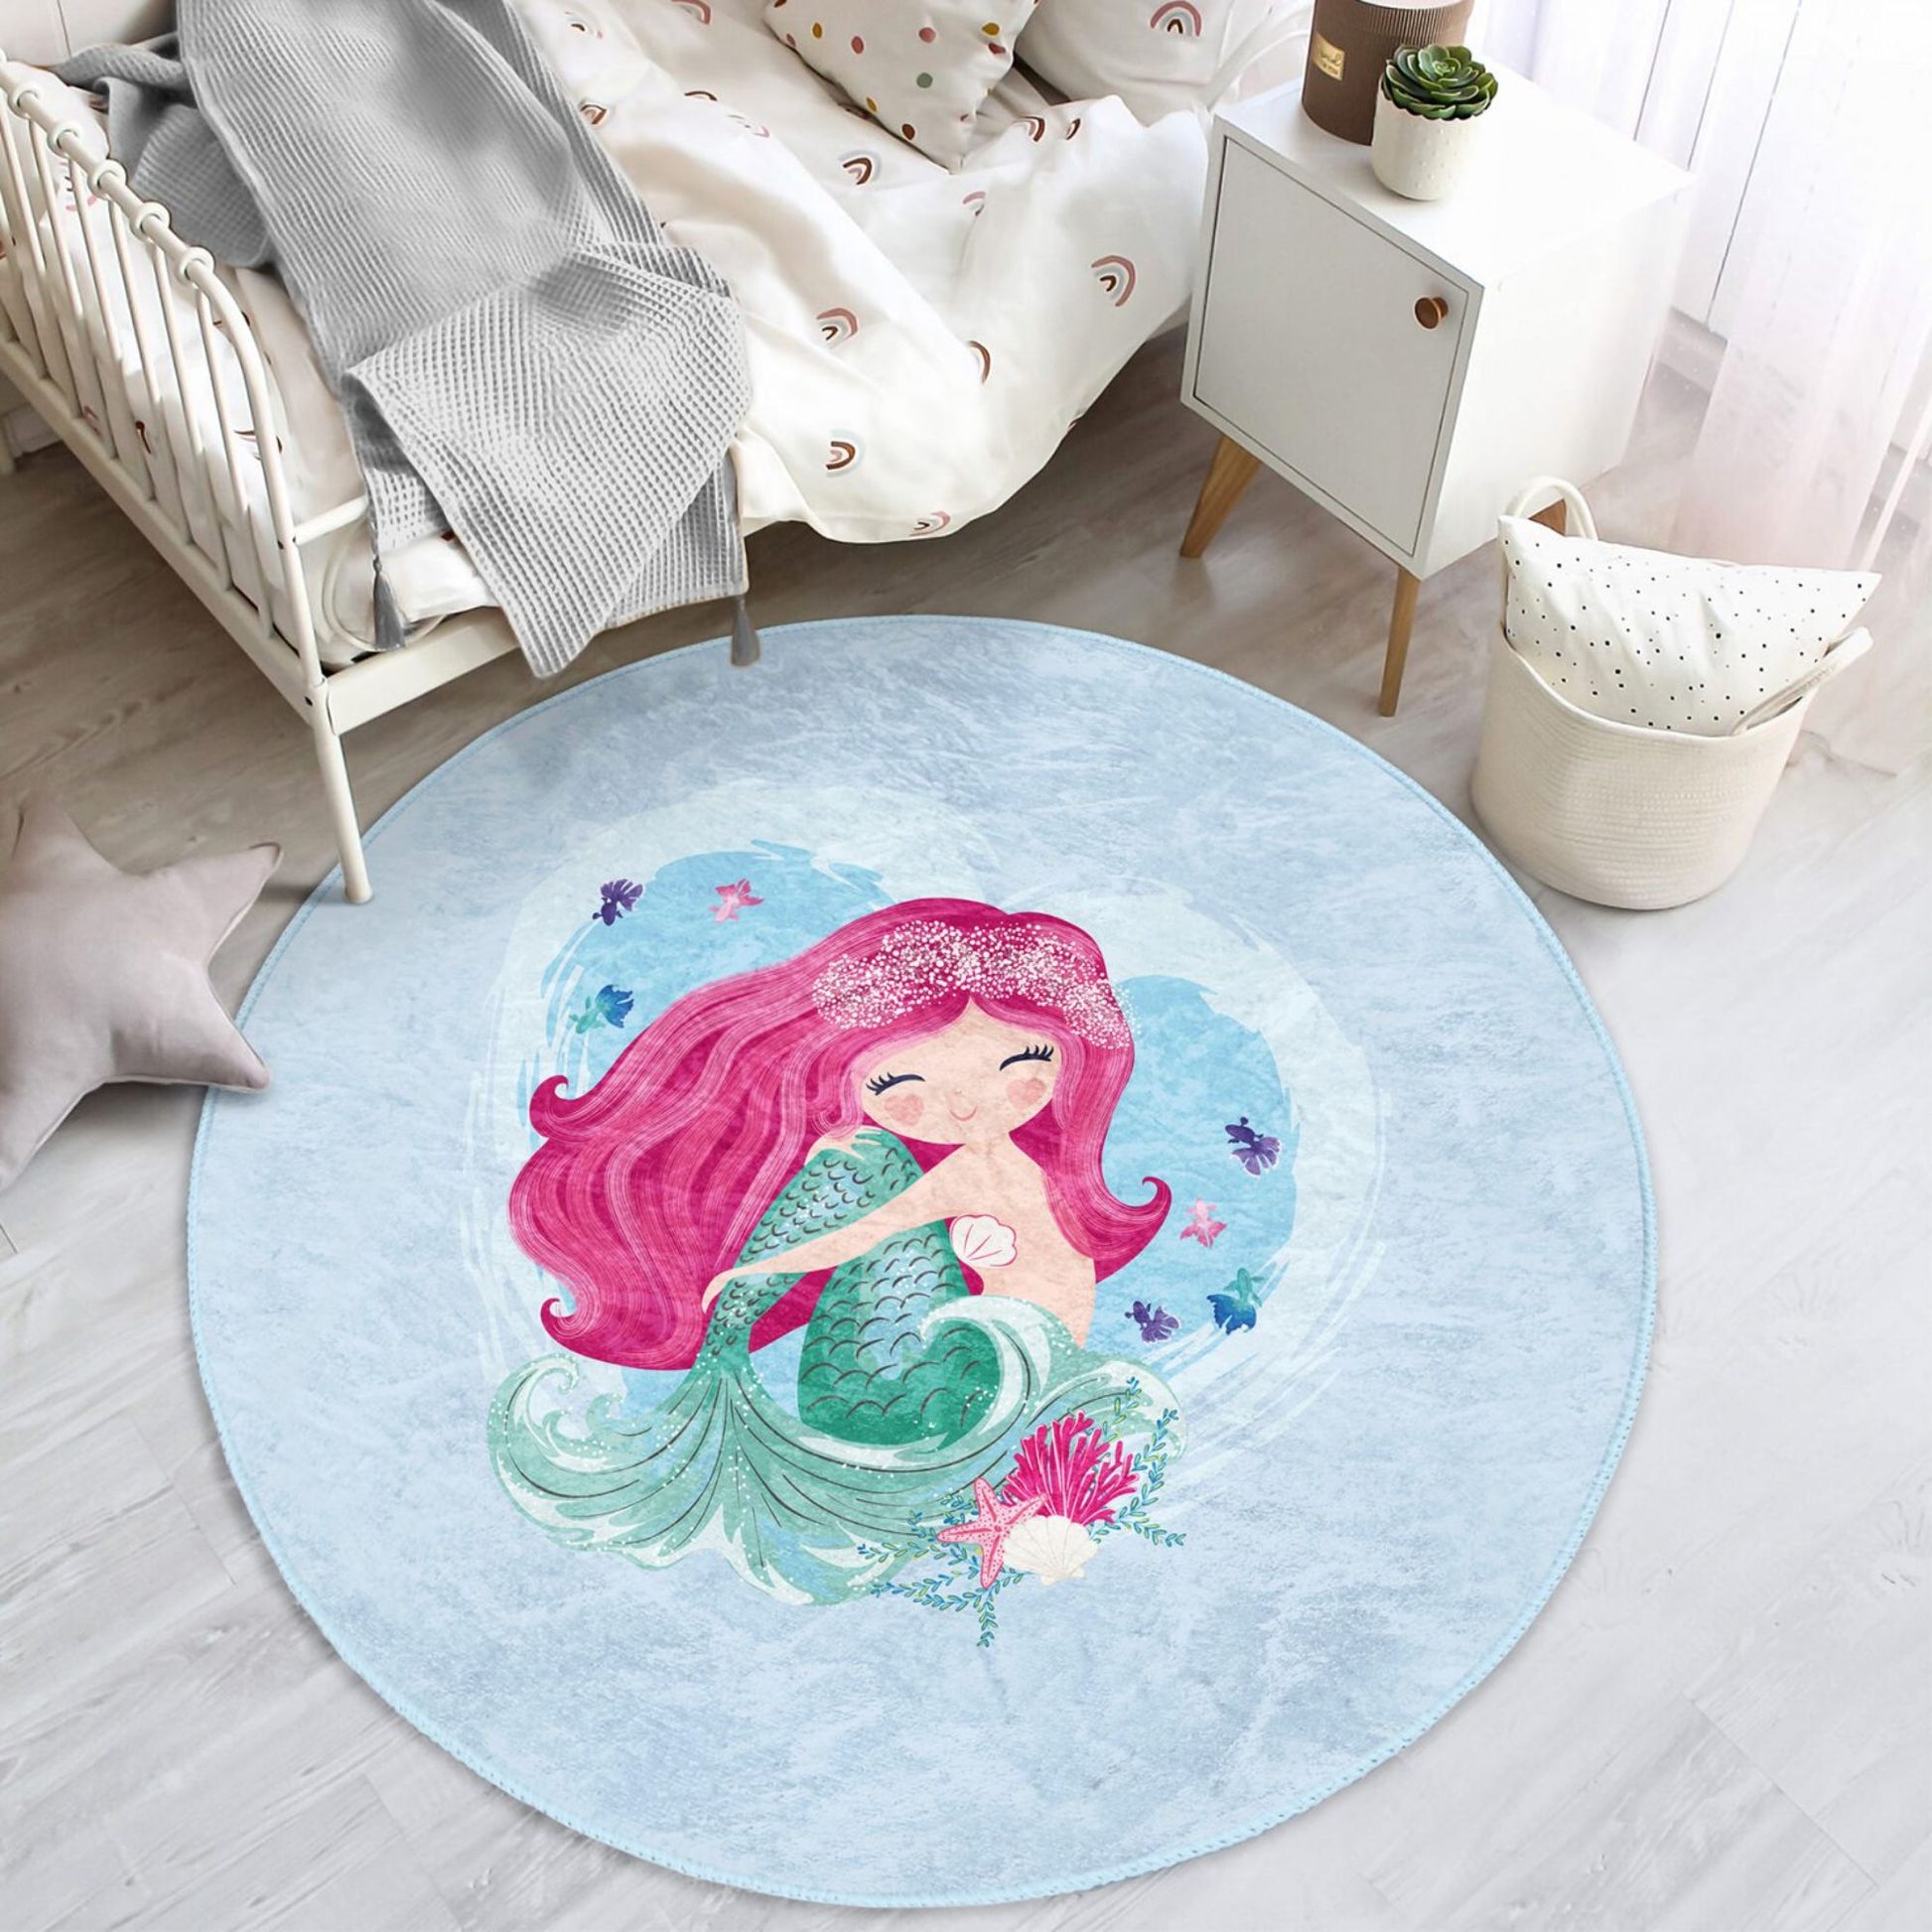 Rug with Mermaid in the Sea Design for Kids' Play Area